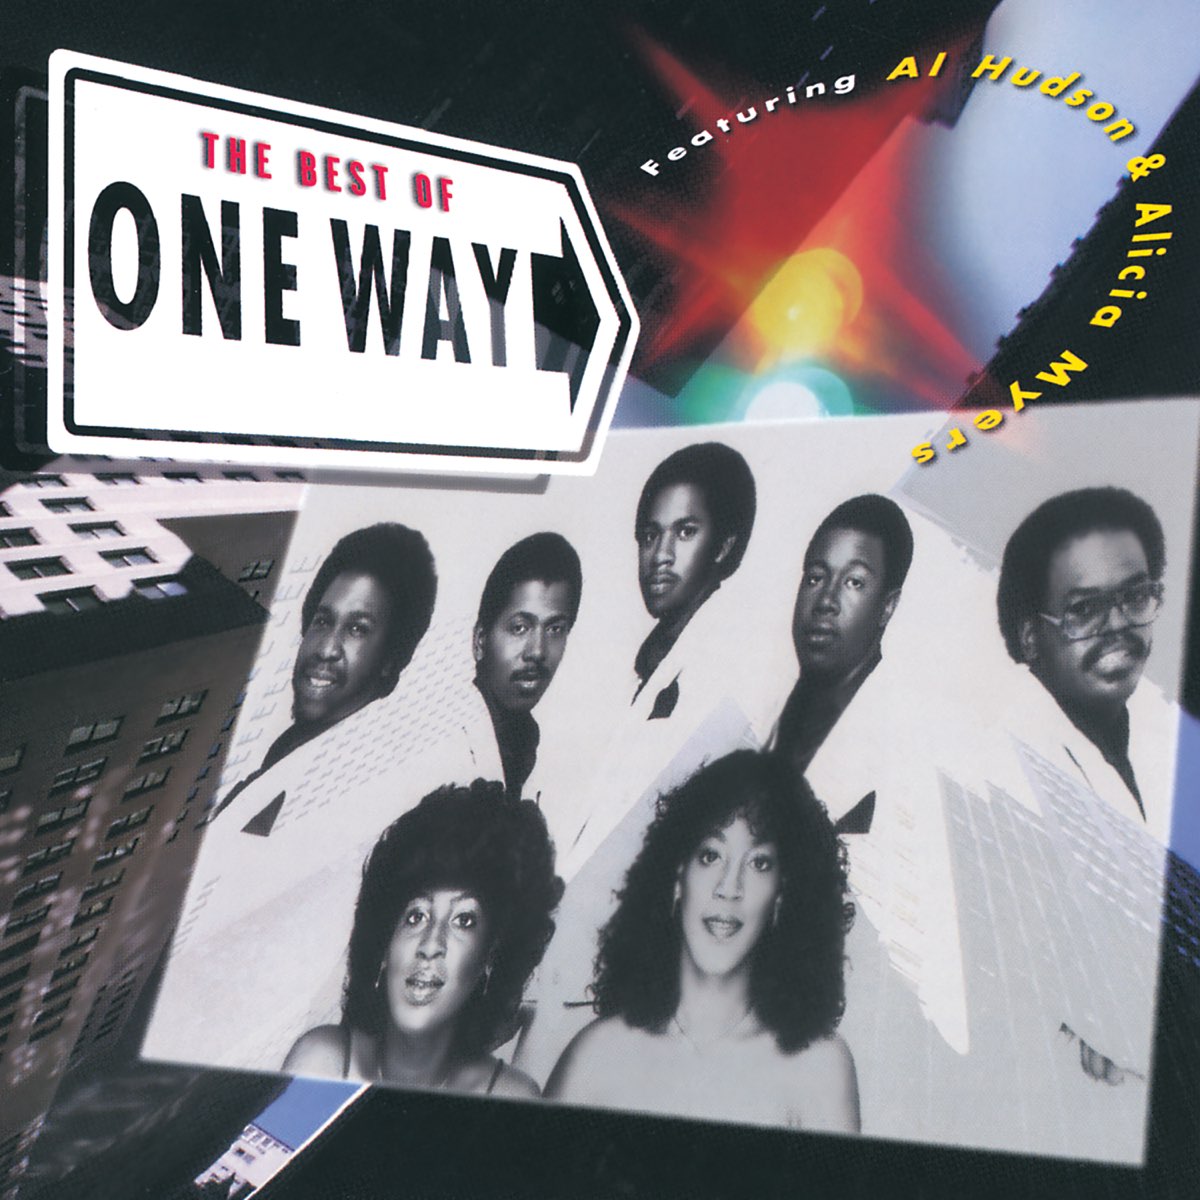 The Best of One Way - Album by One Way - Apple Music